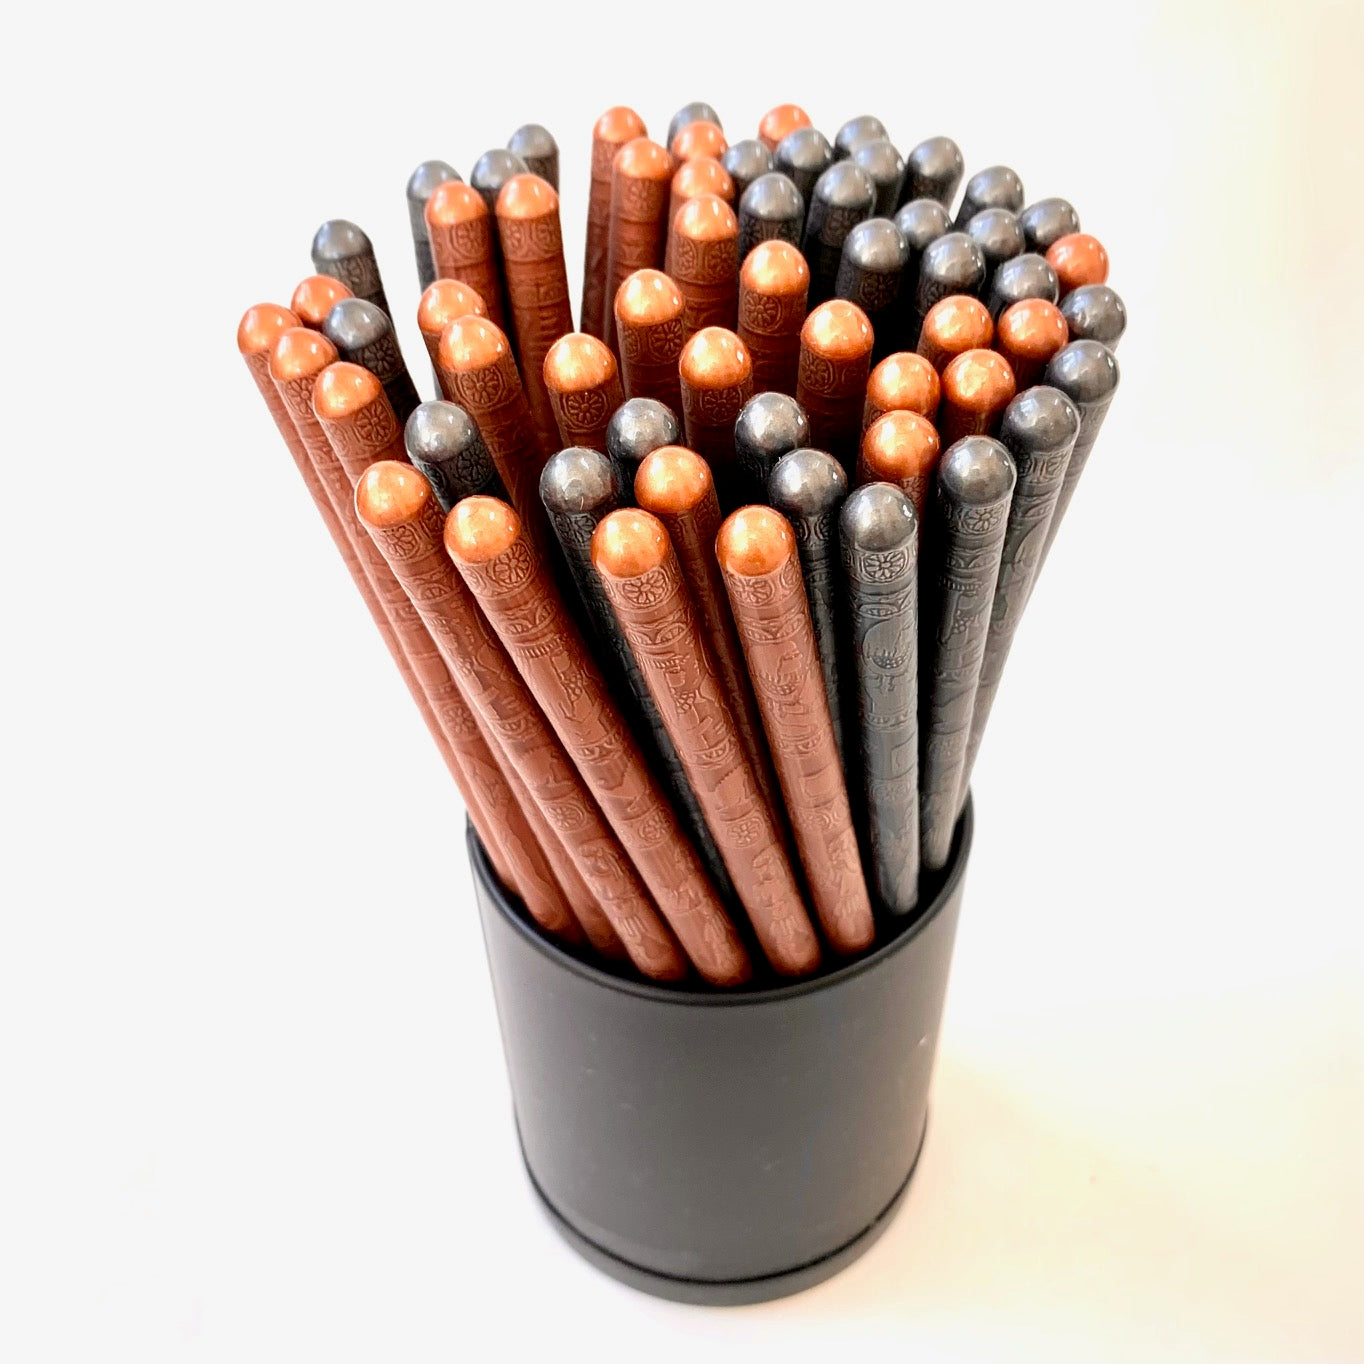 X 21730 EGYPTIAN PENCILS-DISCONTINUED